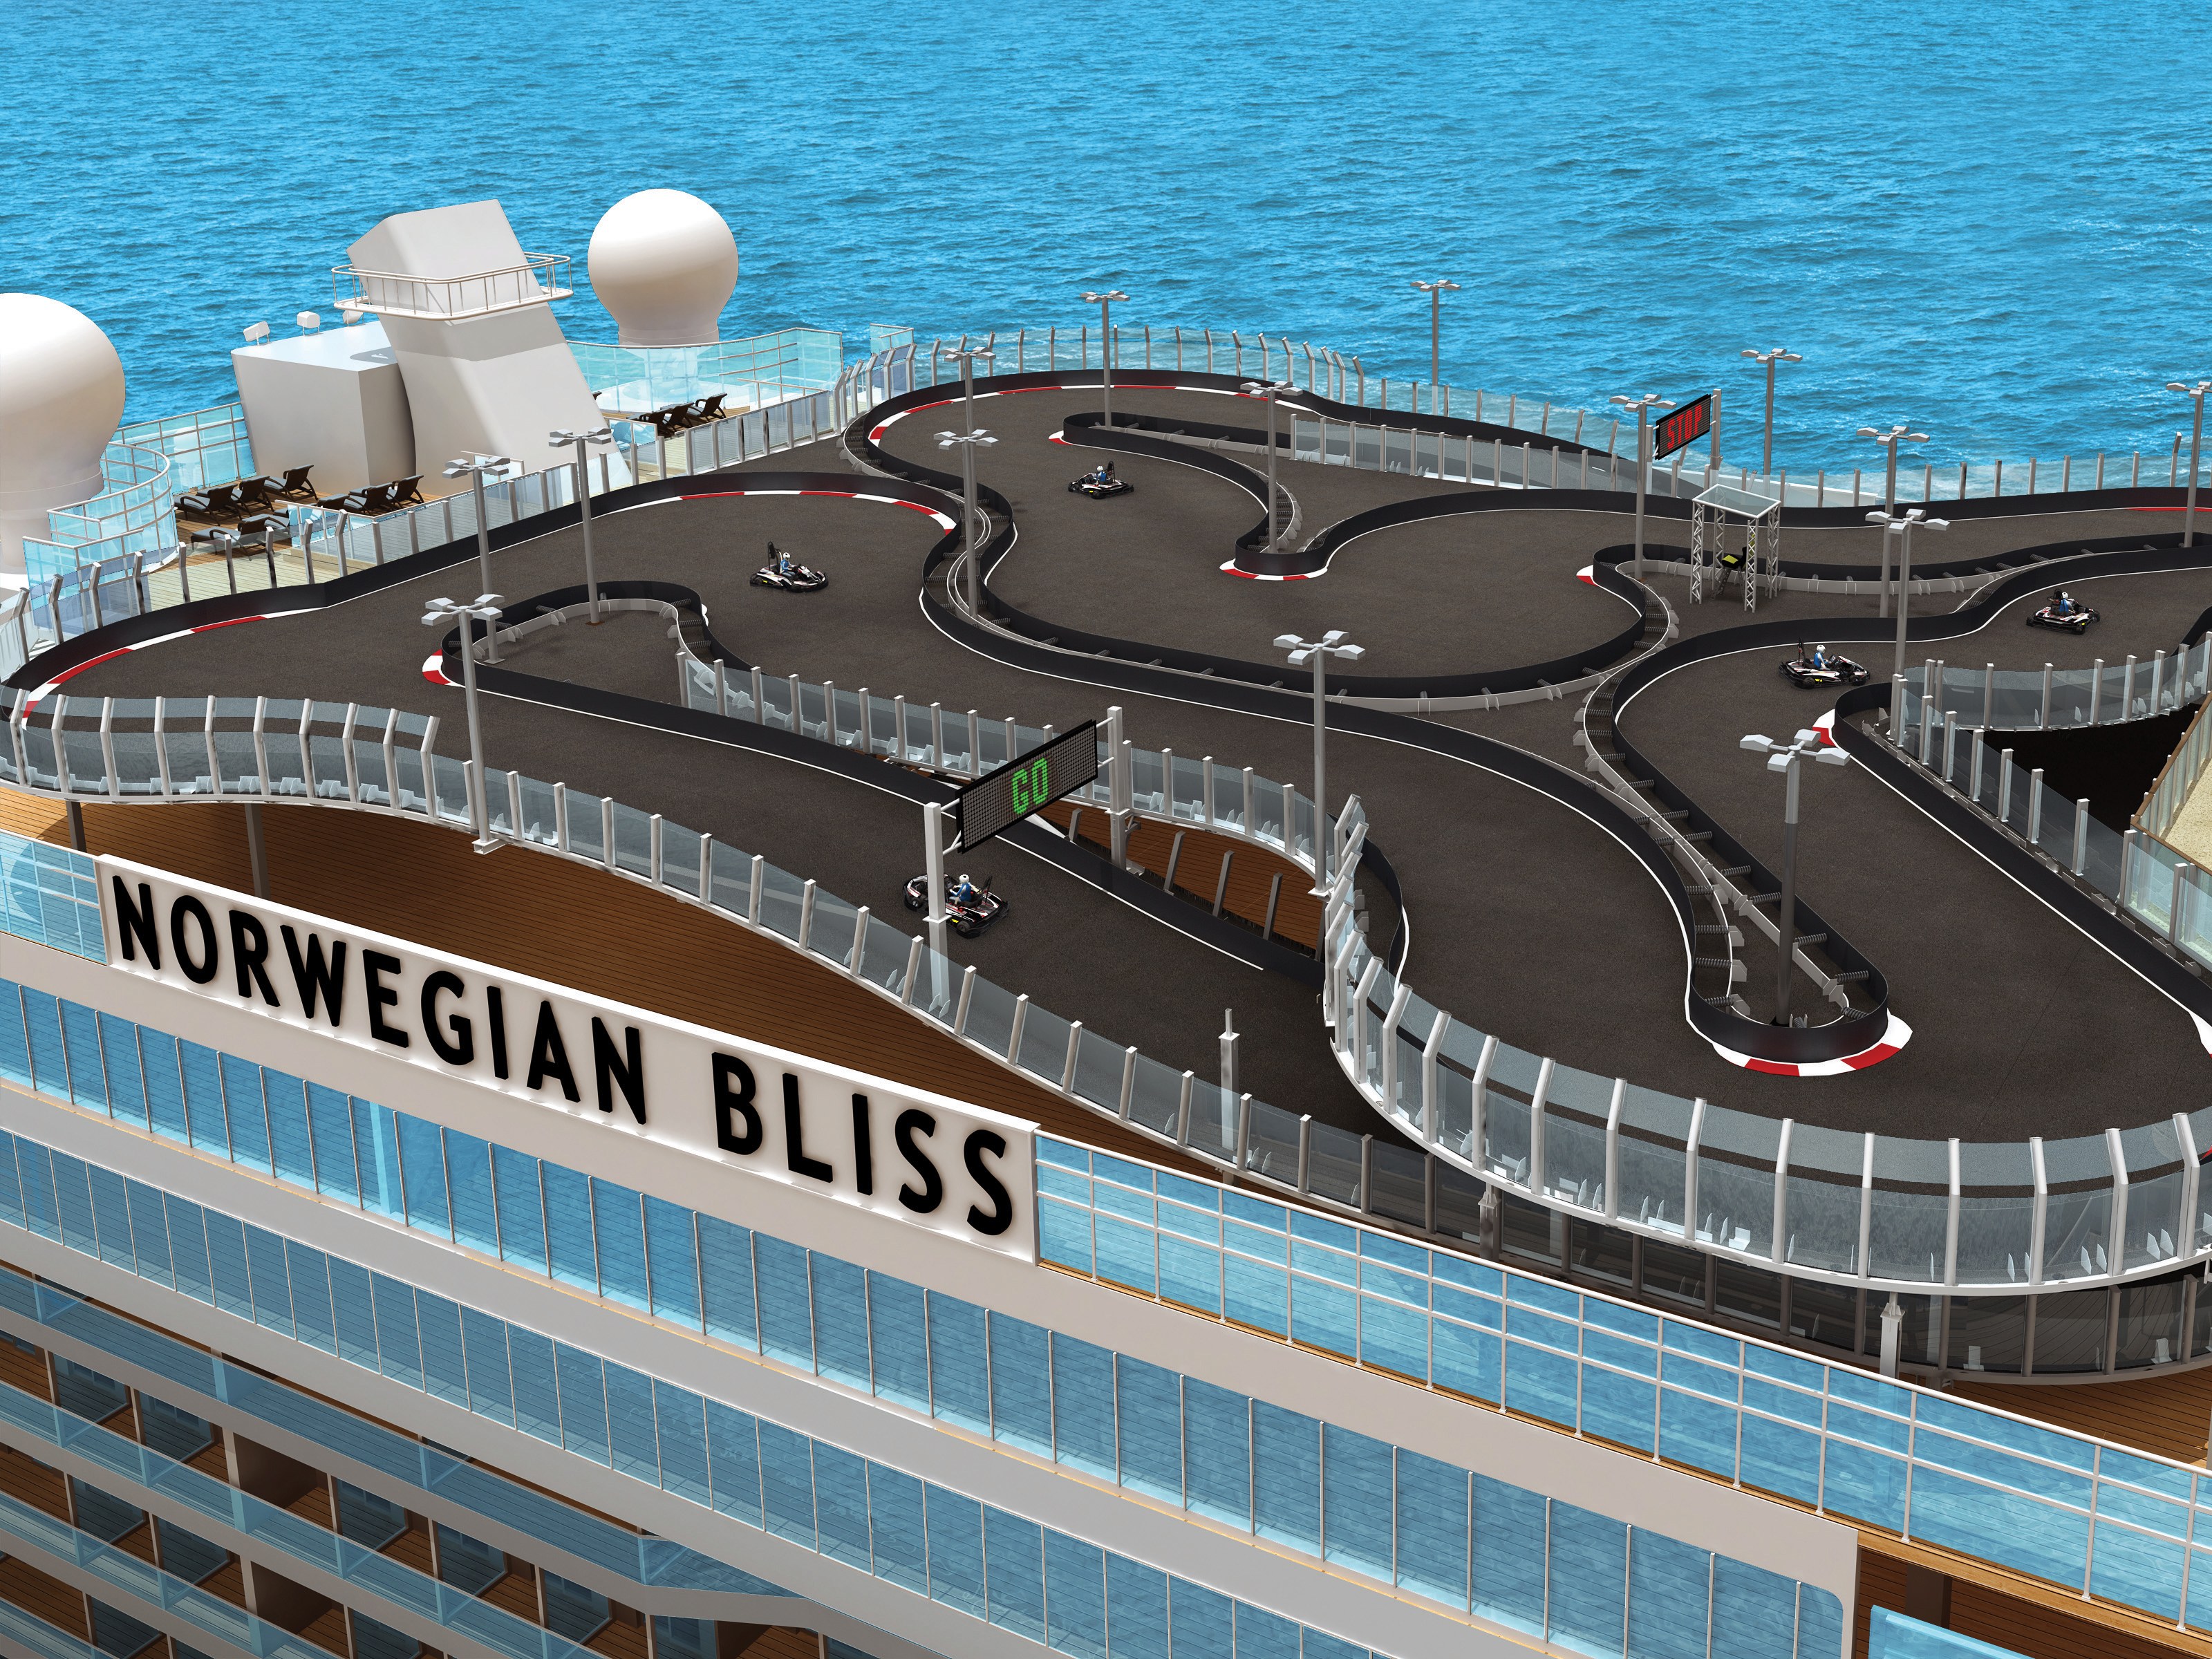 Norwegian's New 'Bliss' Cruise Ship Will Have Biggest Race Track at ...